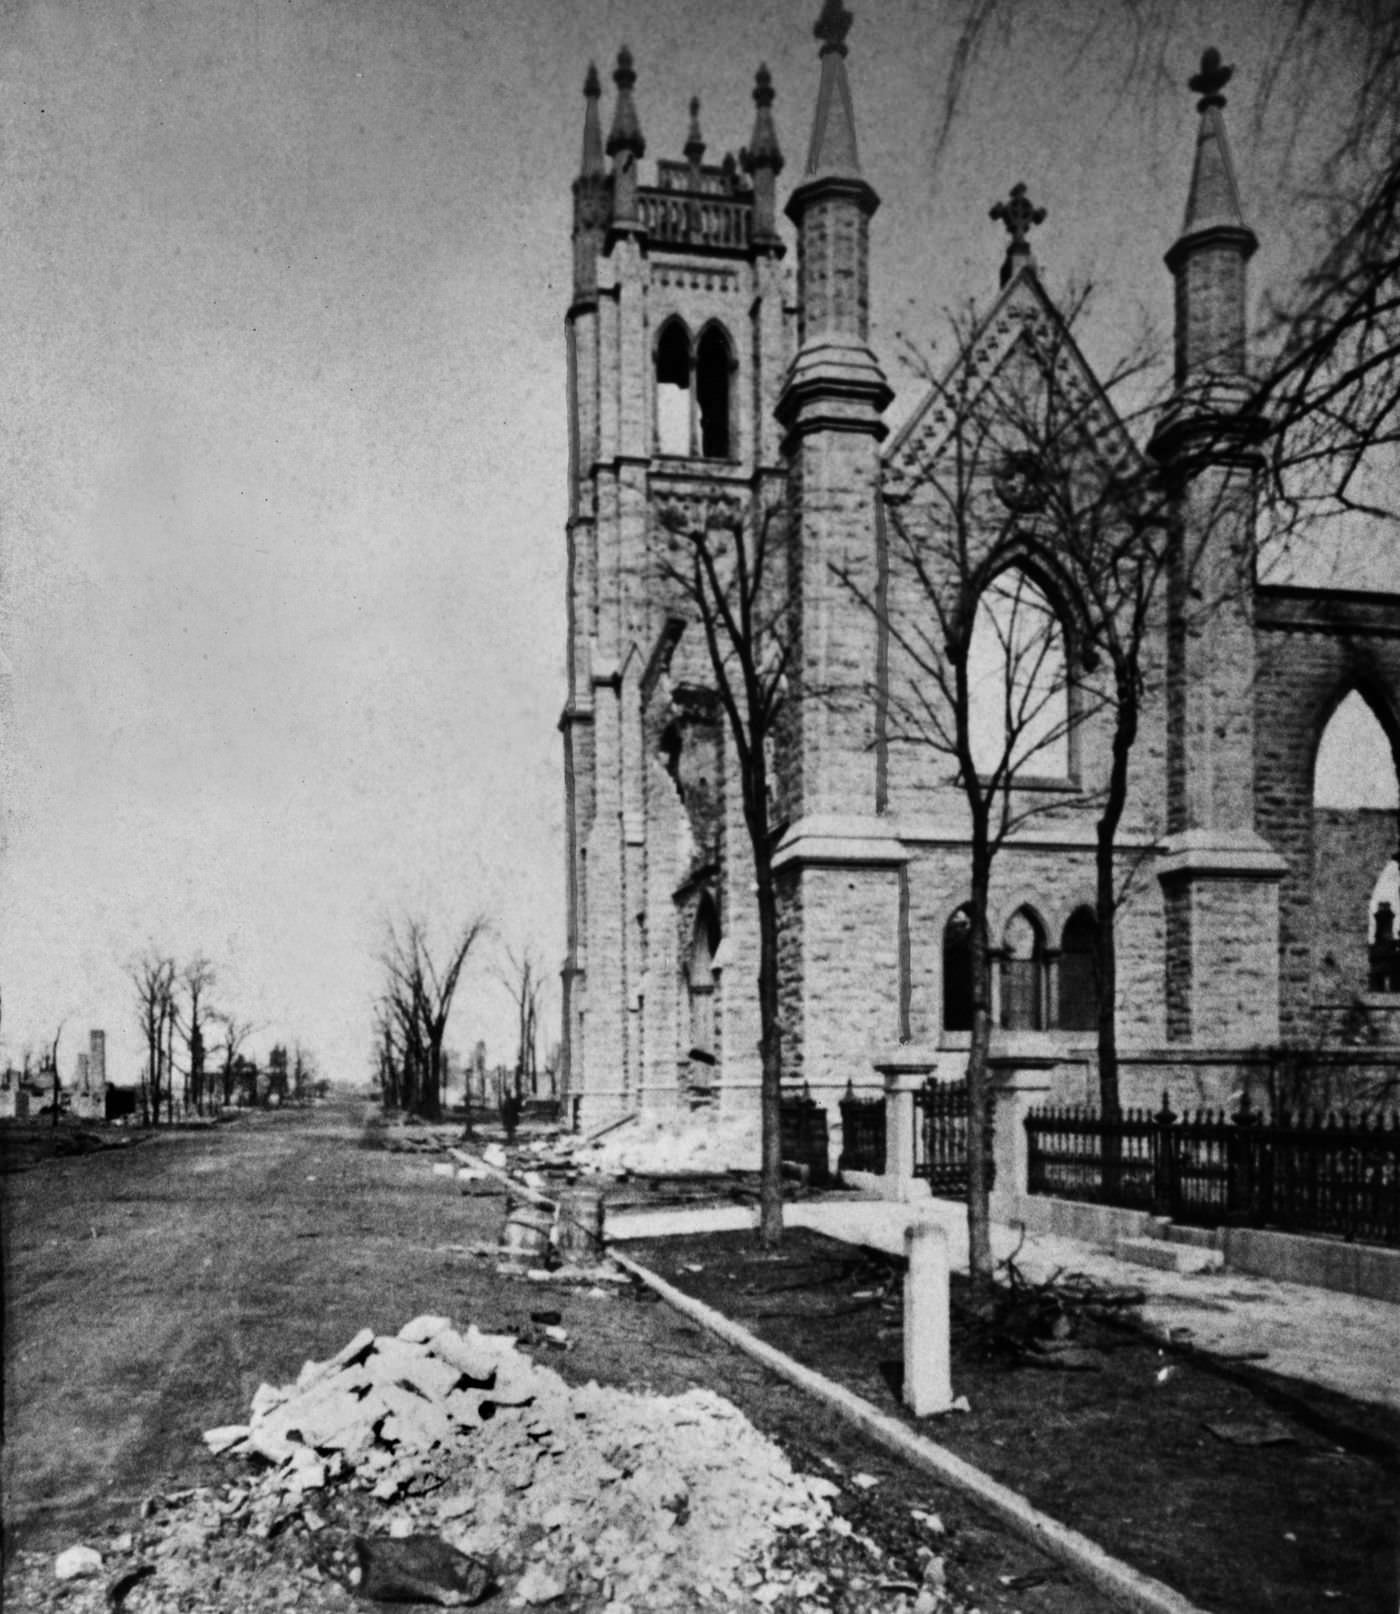 The wreckage of St. James Episcopal Church looking north on Rush Street from Huron Street in the aftermath of the Great Chicago Fire in 1871.